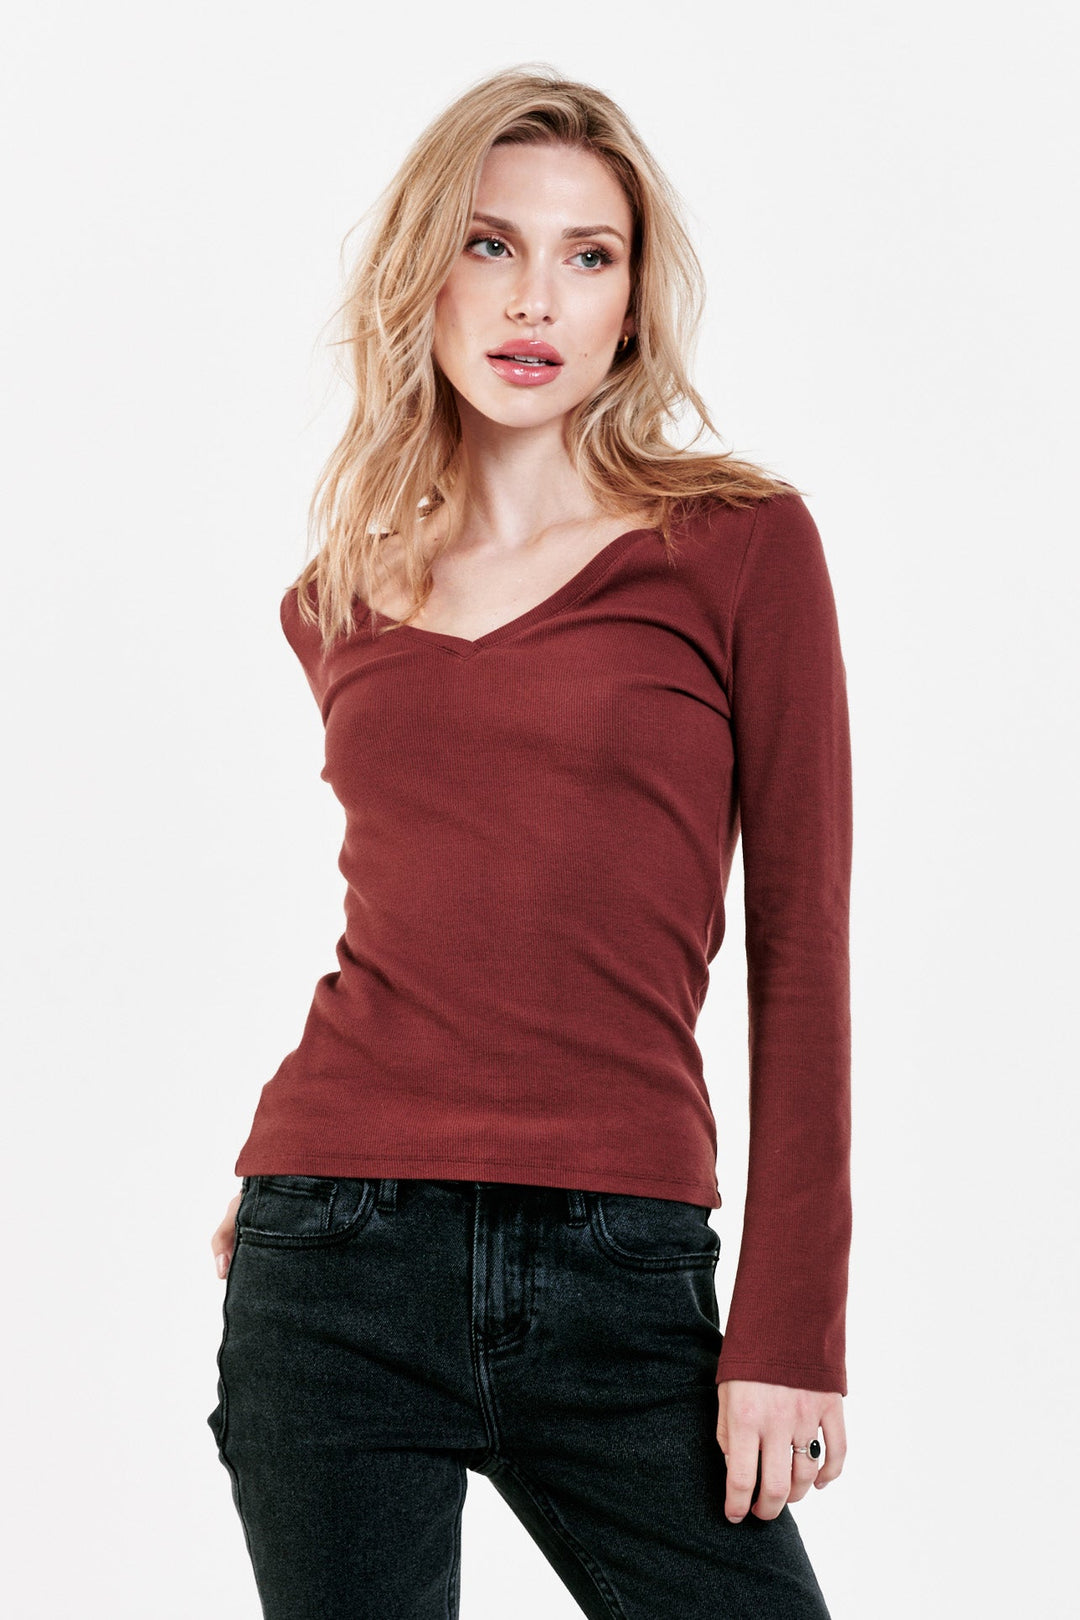 image of a female model wearing a SCARLETT V-NECK TOP CHOCOLATE TRUFFLE TOPS